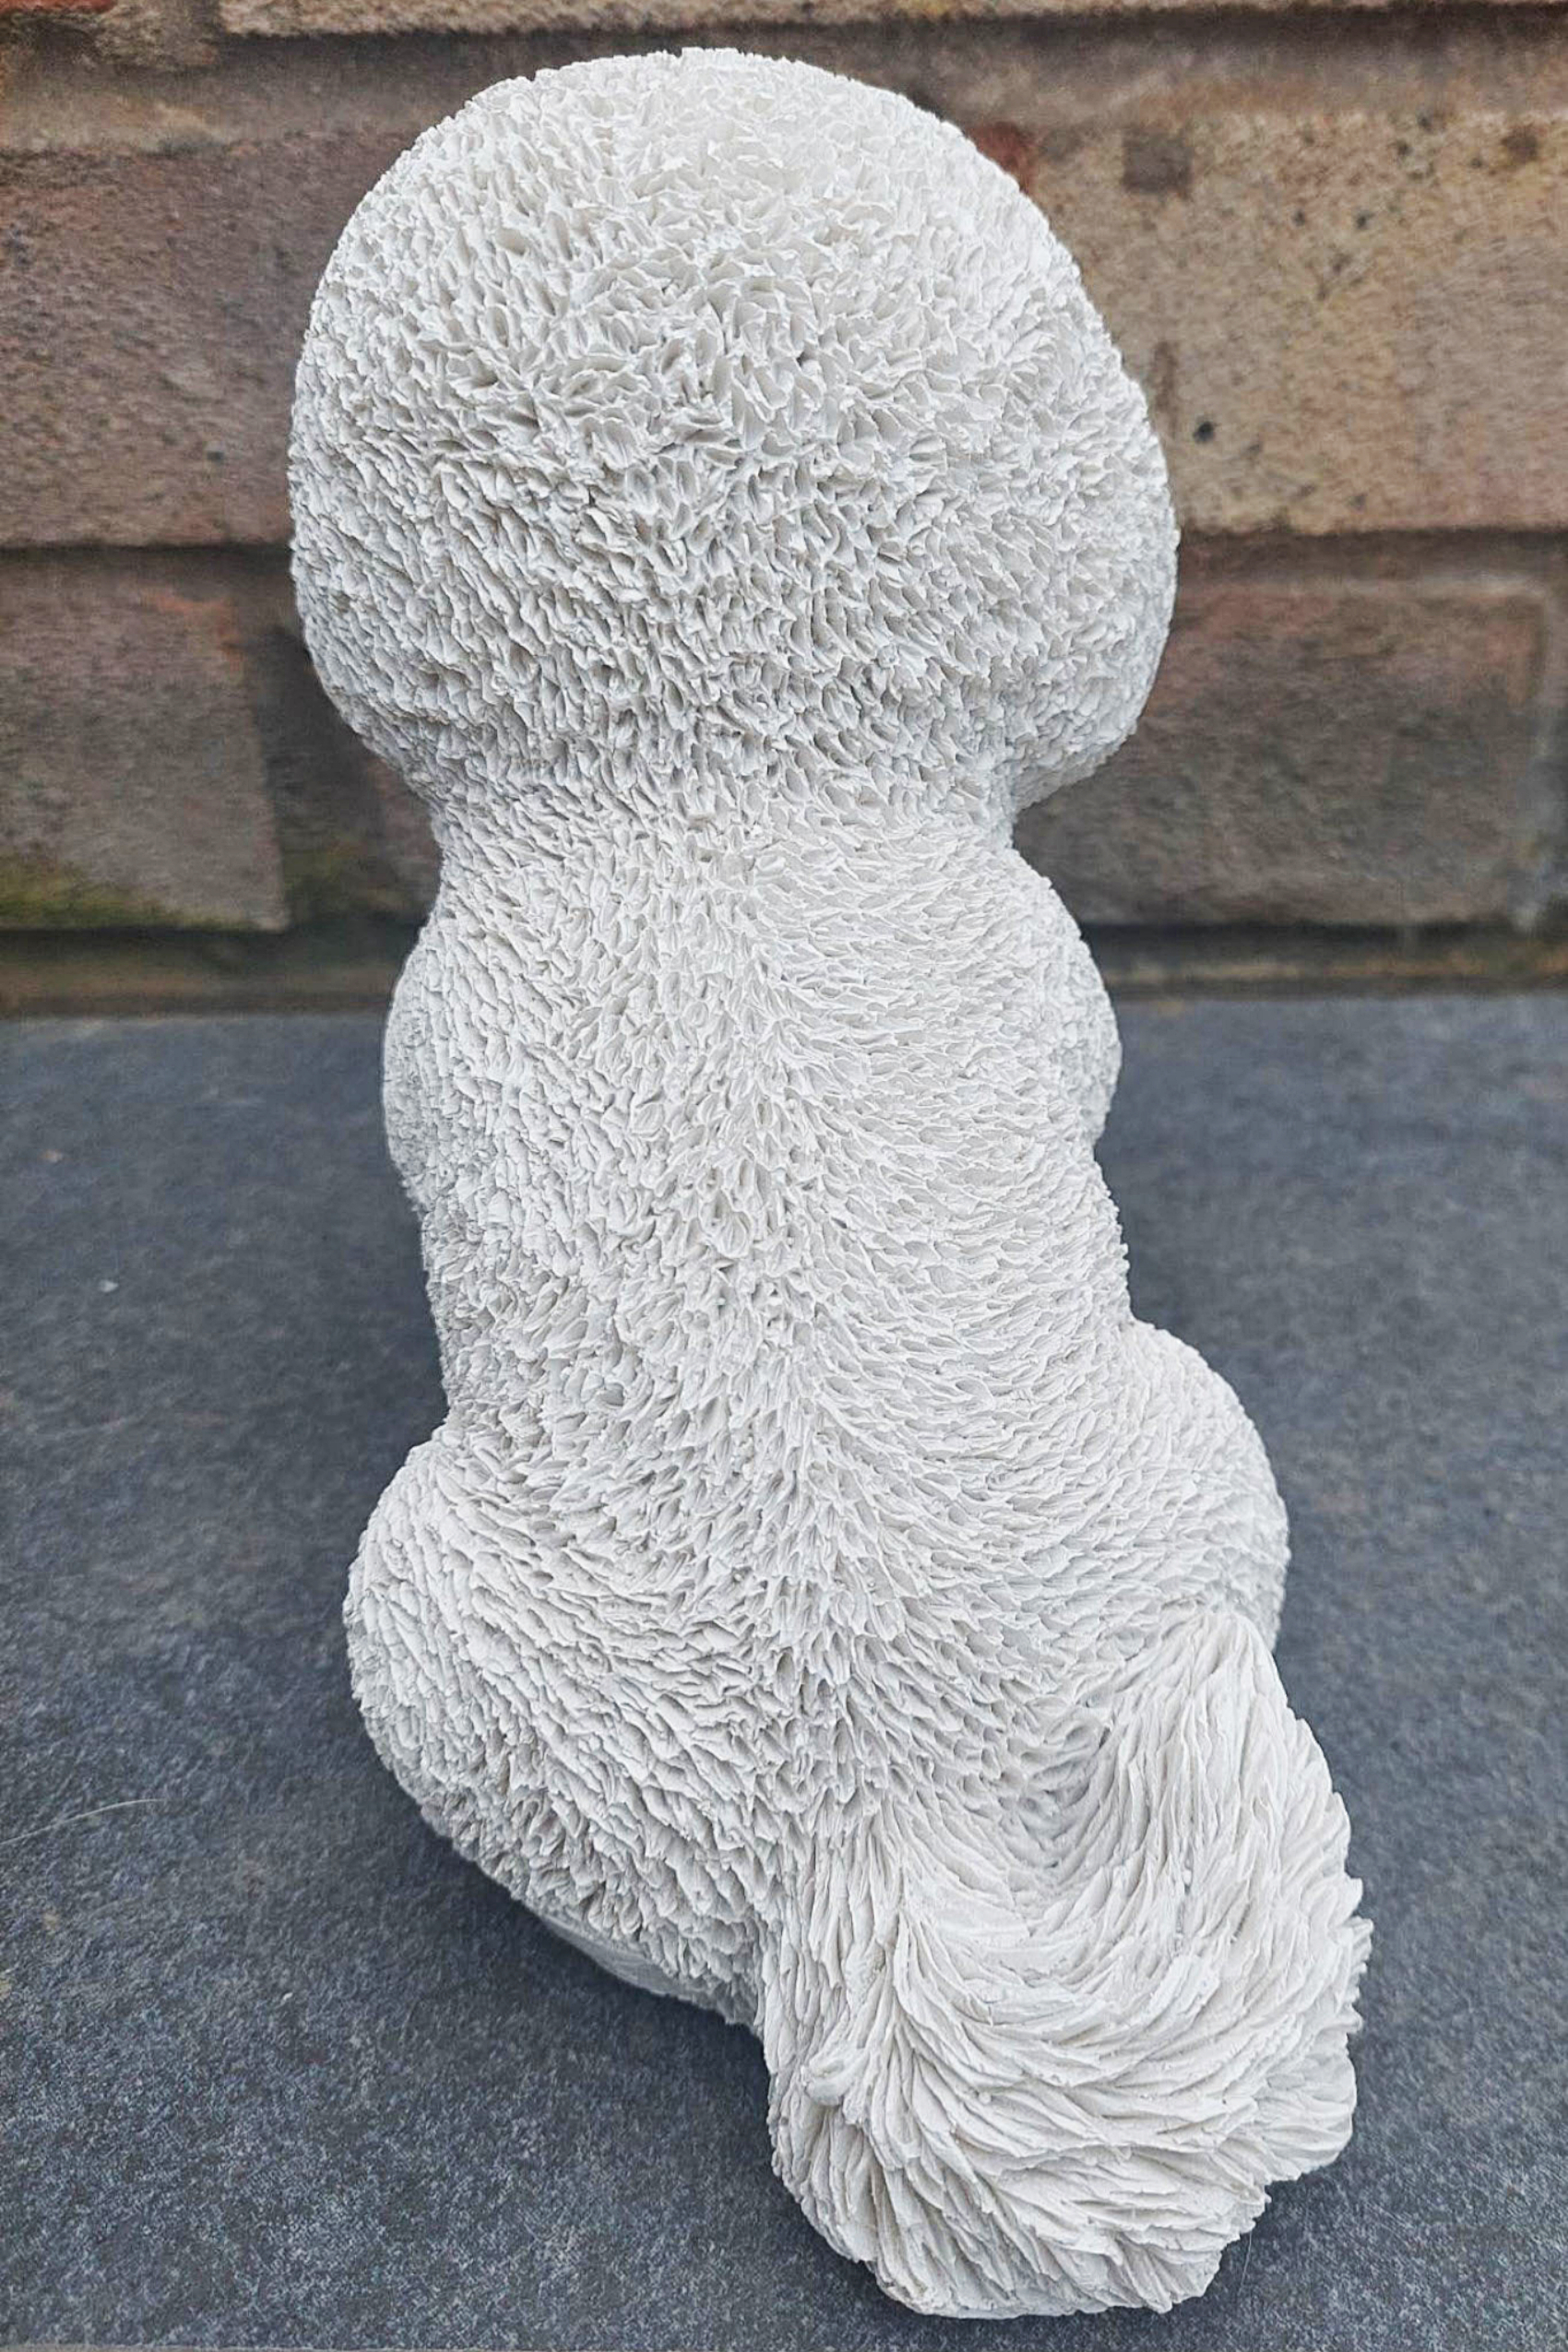 Well Groomed Sitting Bichon Frise Garden or Home Ornament - Image 4 of 4